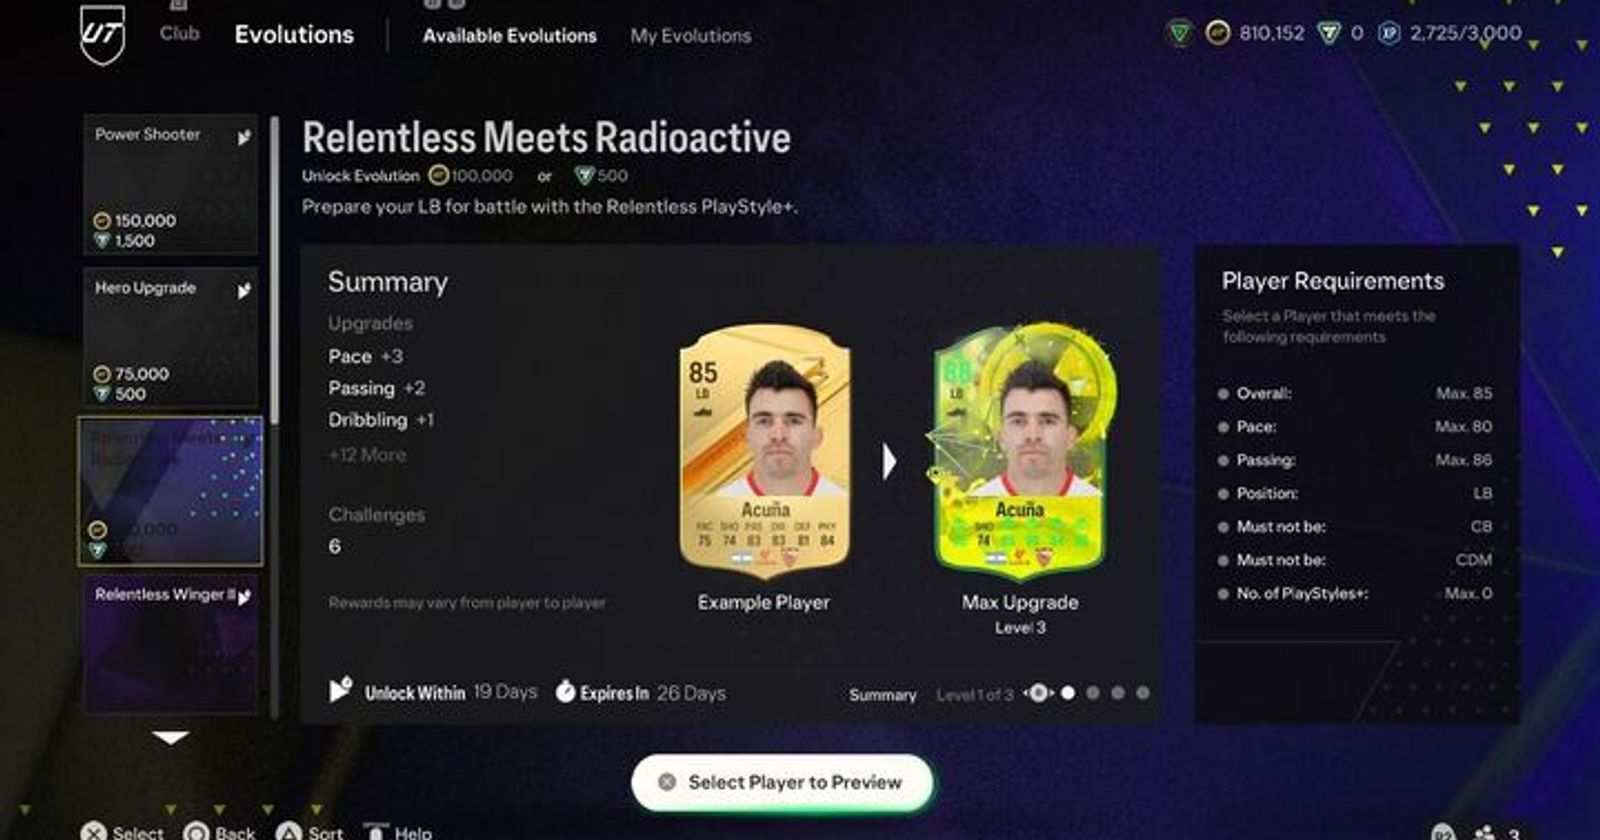 Radioactive Maestro EA FC 24 Evolution Players and Challenges